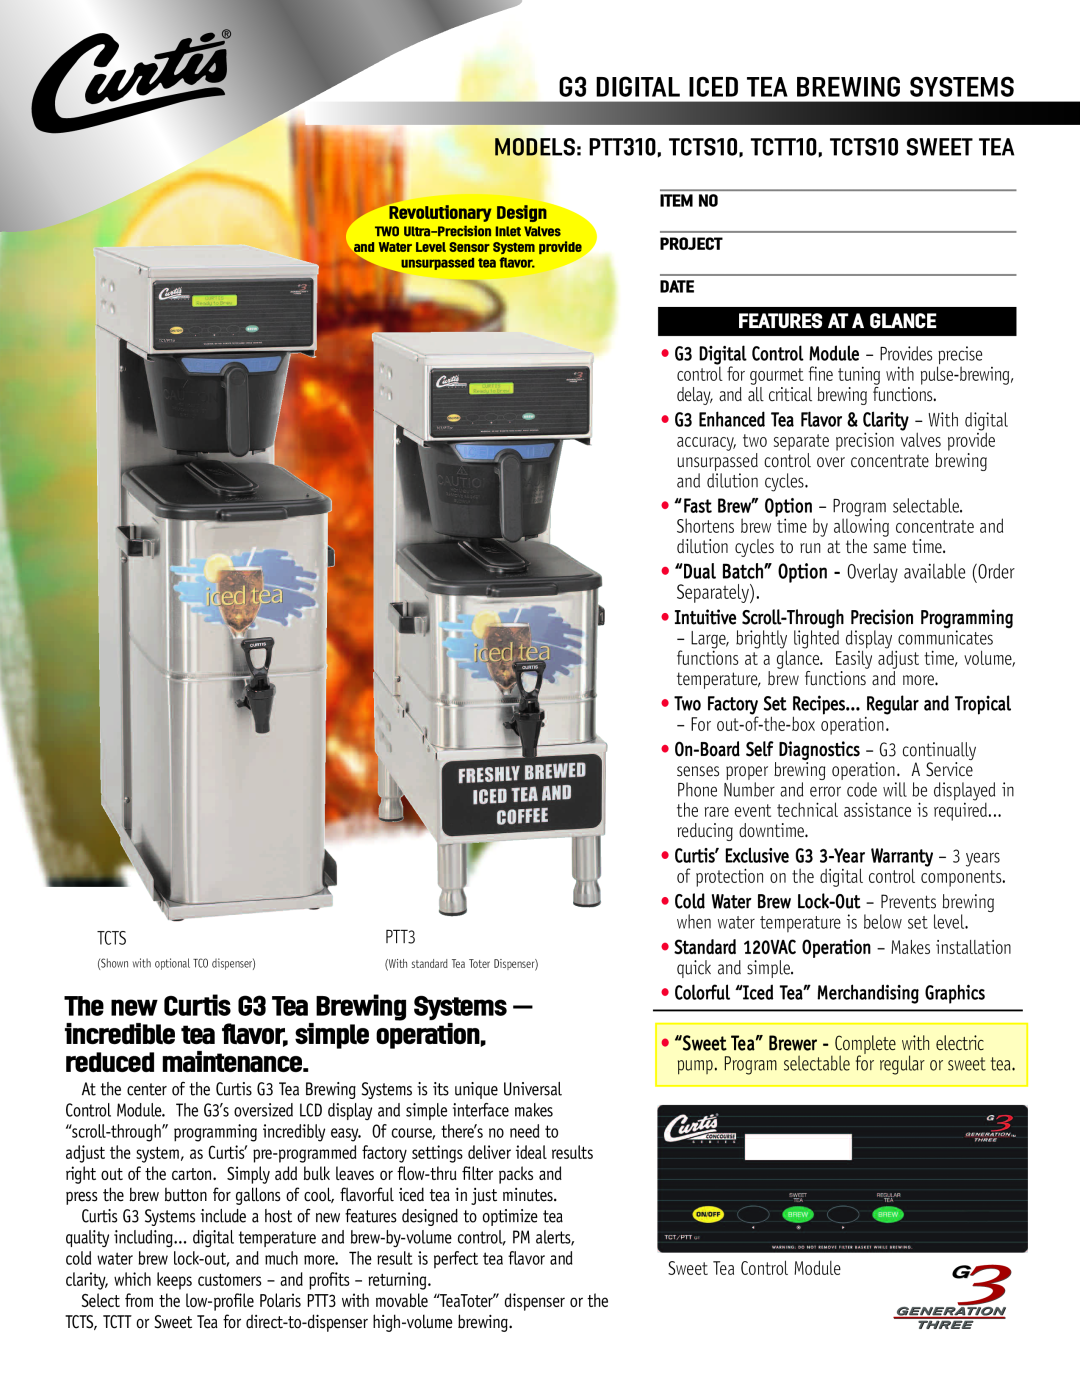 Curtis PTT310, TCTT10 manual Features At A Glance, G3 DIGITAL ICED TEA BREWING SYSTEMS, Tcts, For out-of-the-box operation 